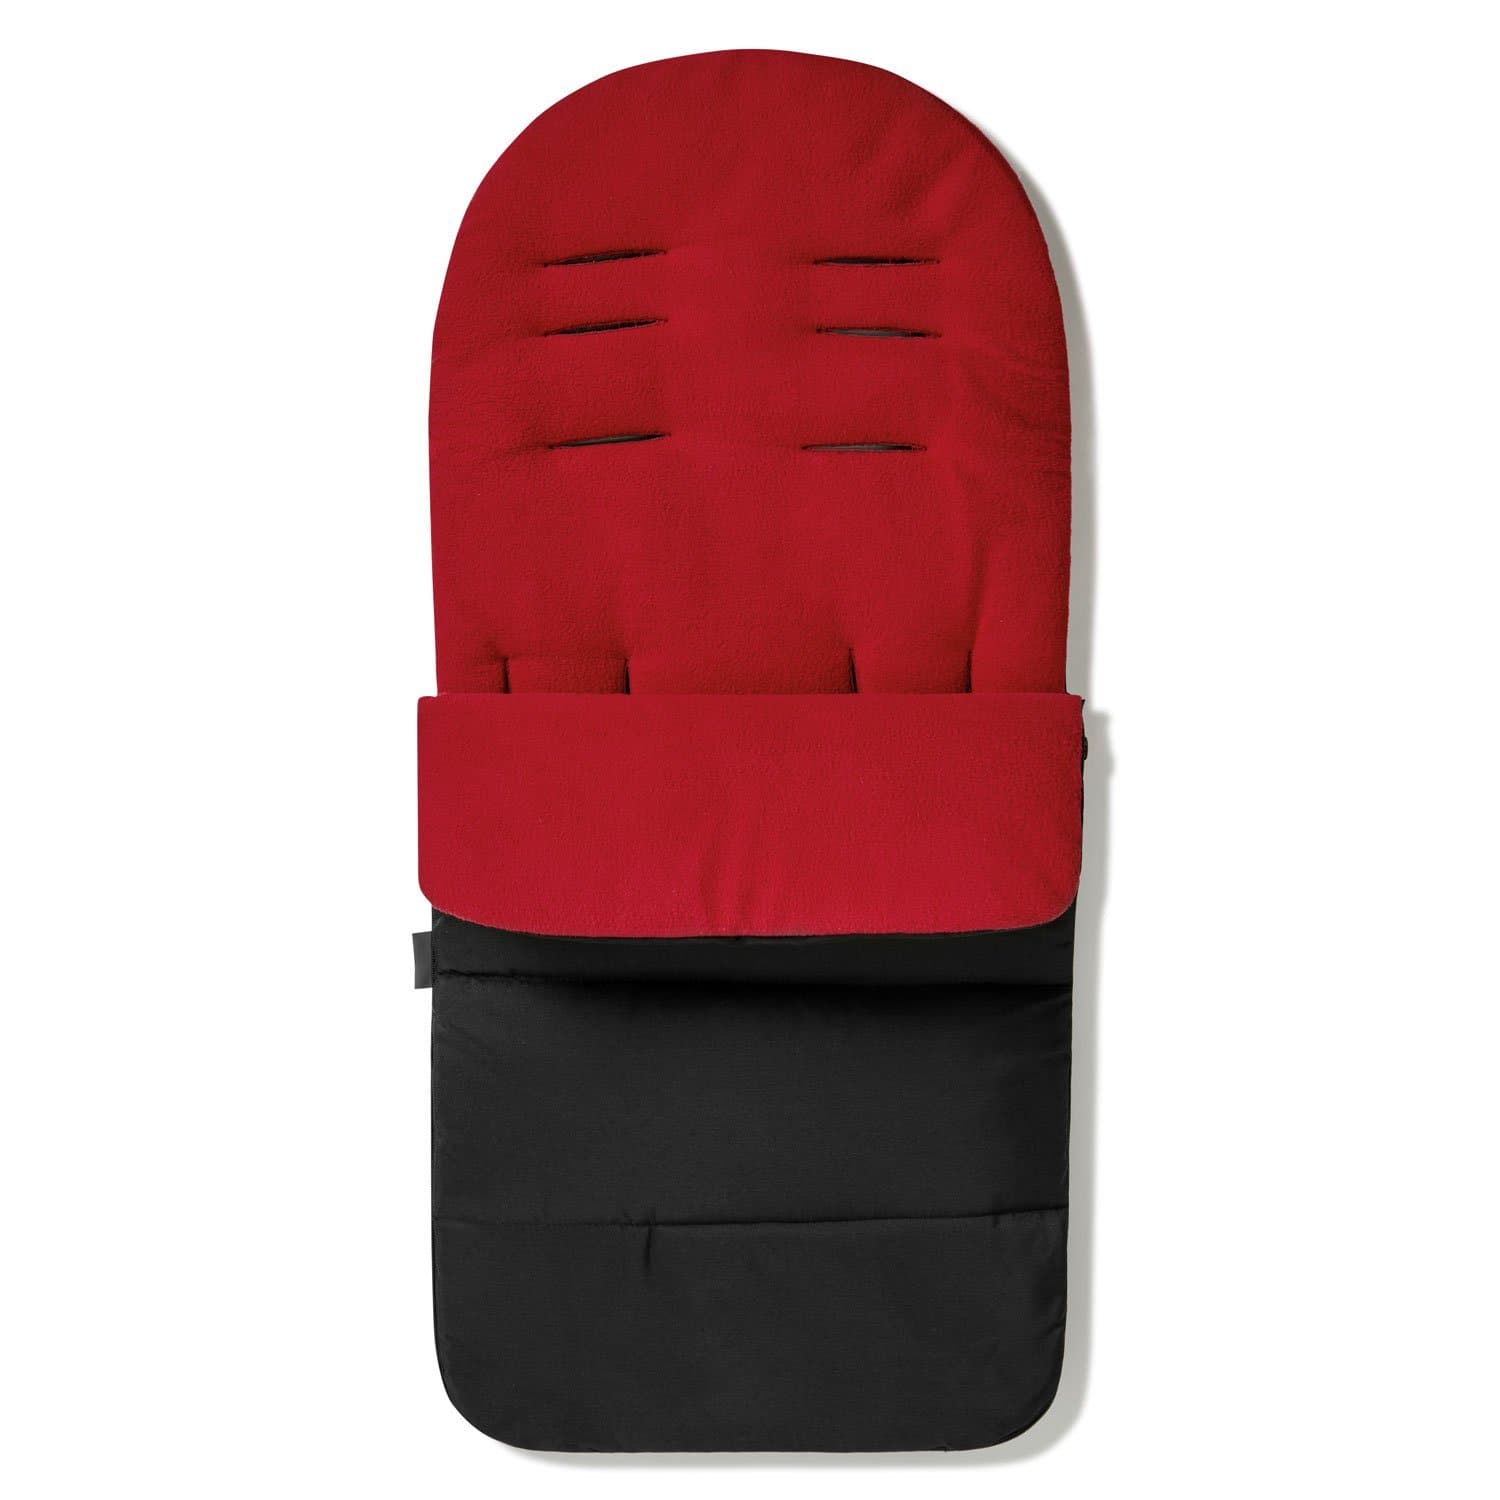 Premium Footmuff / Cosy Toes Compatible with Maclaren - Fire Red / Fits All Models | For Your Little One